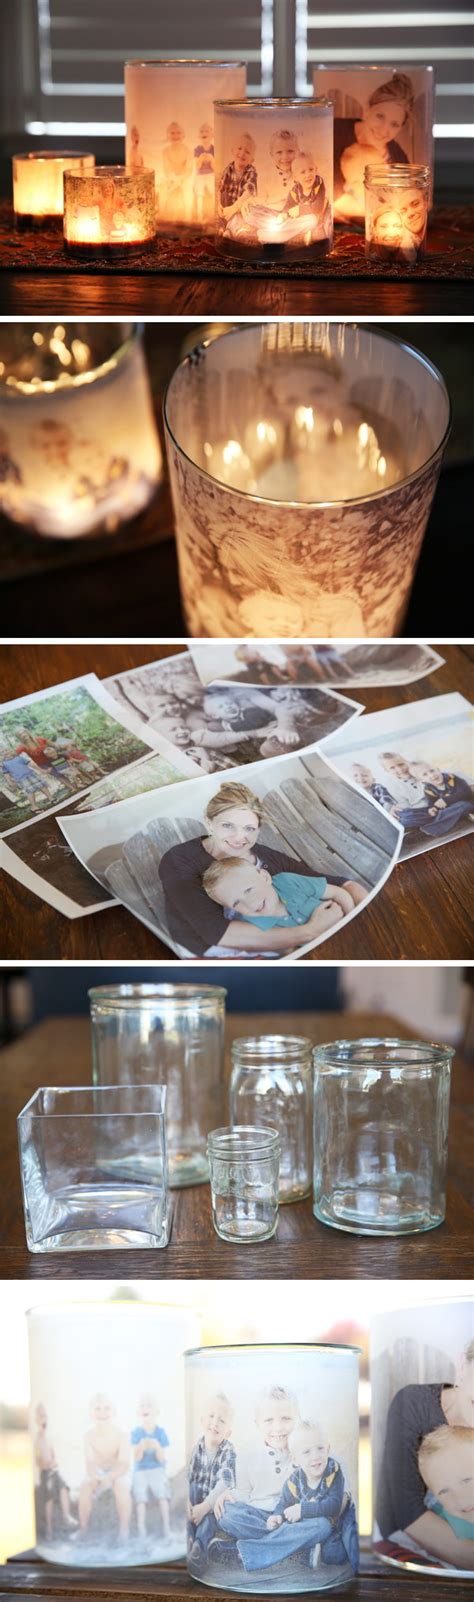 There is nothing like a handmade gift and these diy photo gifts are full of sweet, thoughtful ideas grandparents, friends, parents, kids, and more. 20 DIY Photo Gift Ideas & Tutorials | Styletic